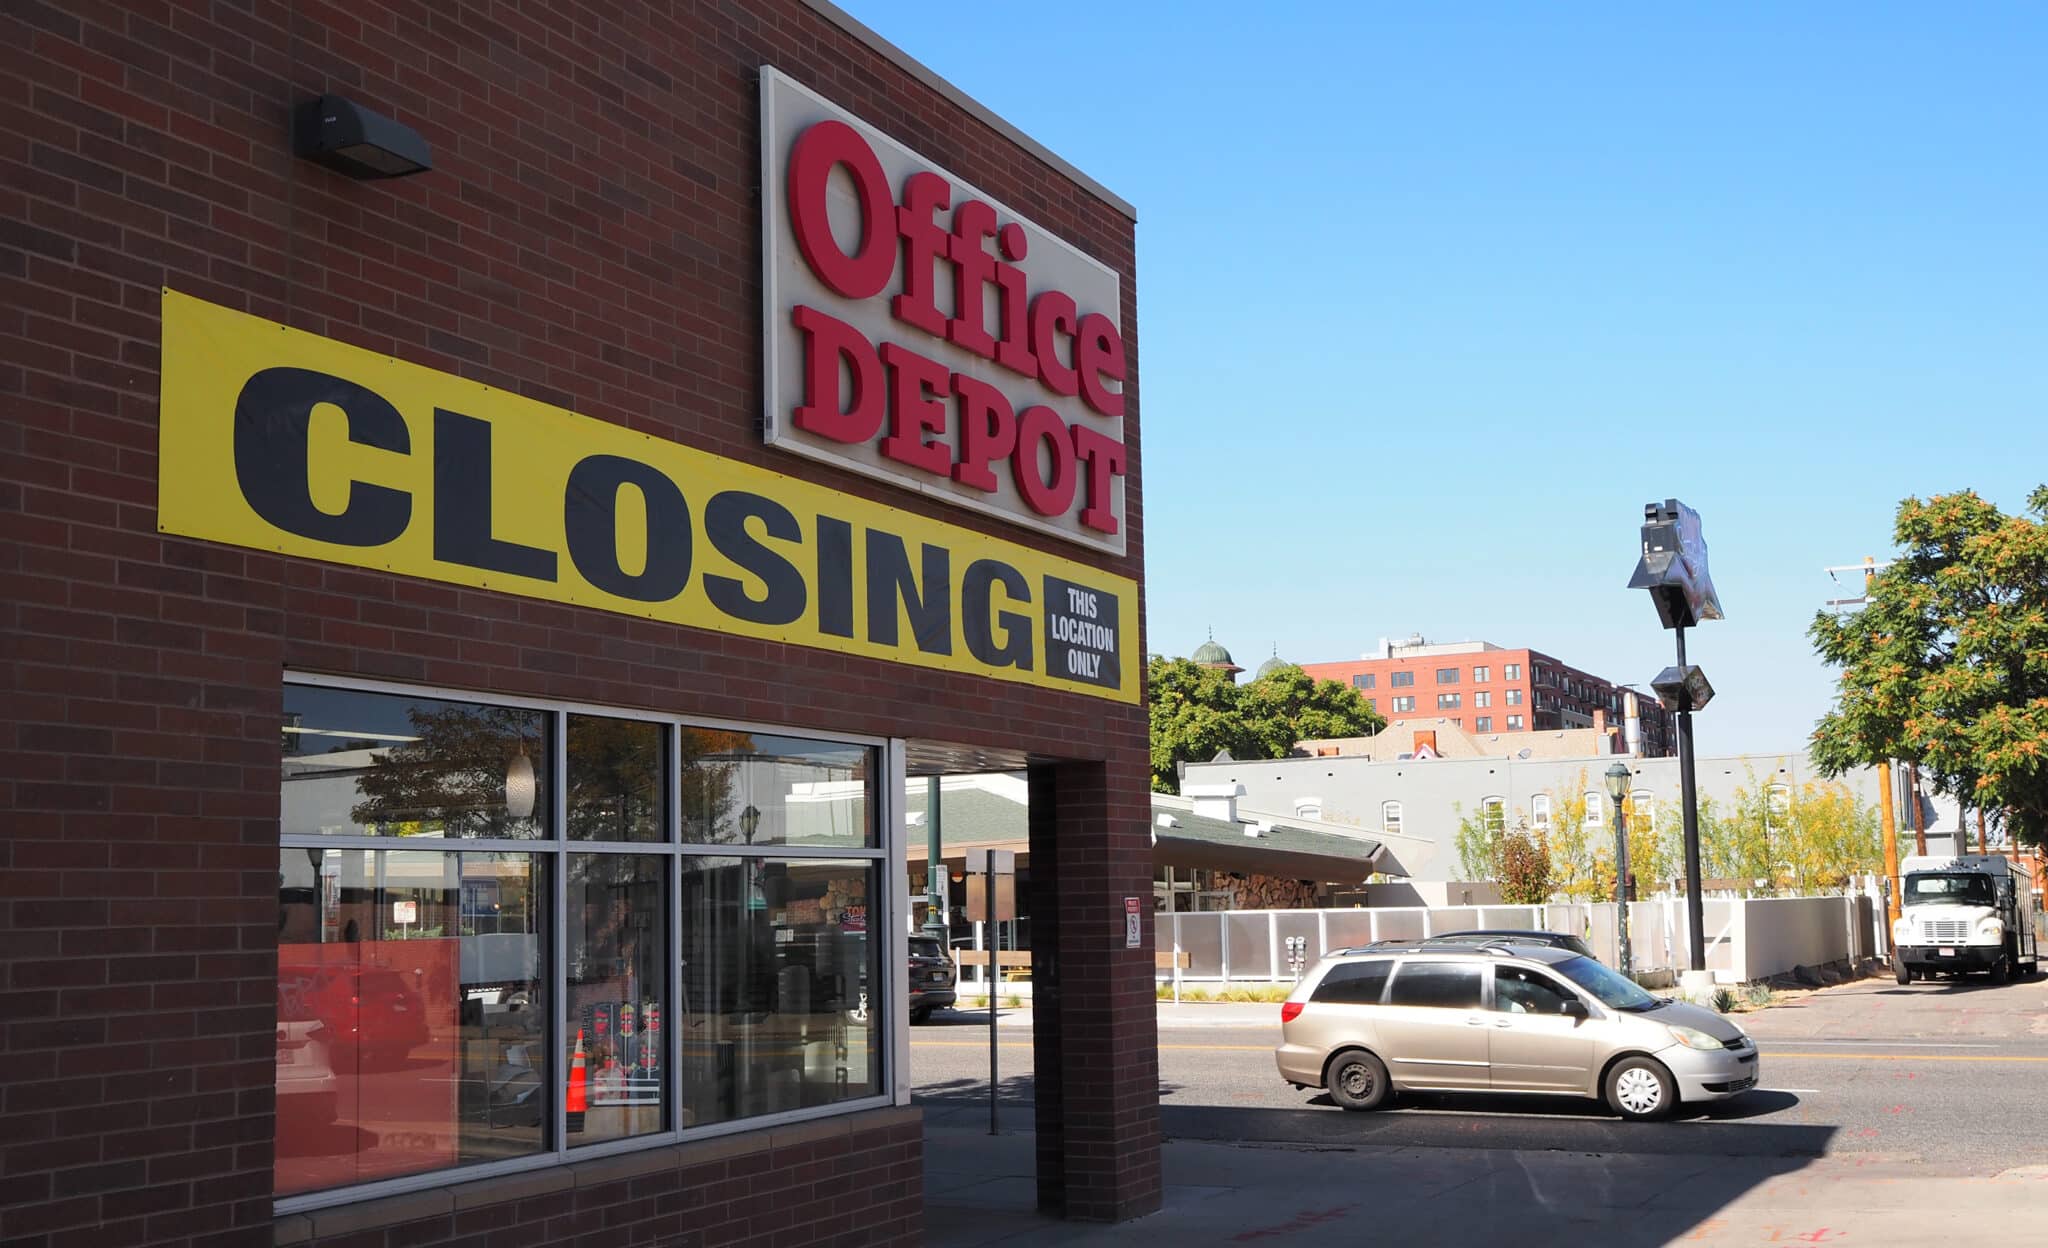 Office Depot on Colfax in Denver closing down